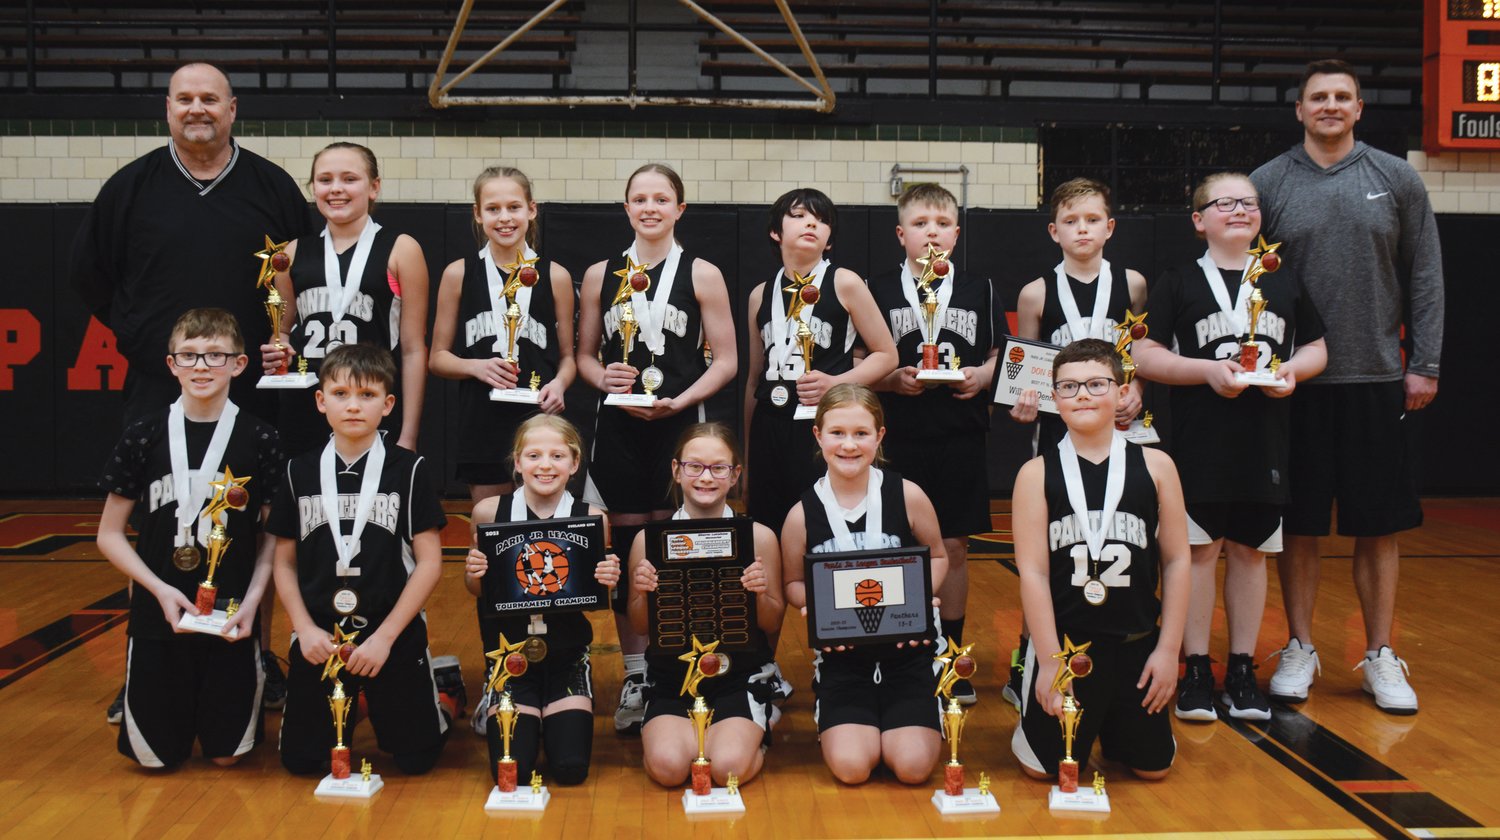 The 2022-23 Junior League champions pose for photos after defeating the Tigers. From left to right, front row, Brantley Bridgewater, Hudson Jewell, Tess Barrett, Lexie Sallee, Lanie Sallee and Hudson Gilbert. Back row, Coach JK Vilk, Layke Sandstrom, Sloan Vilk, Hellie Barrett, Carter Gore, Kahlen Muchow, William Dennis, Brayden Douglas and Head Coach Adam Vilk. Not pictured is Zayne Cusick.